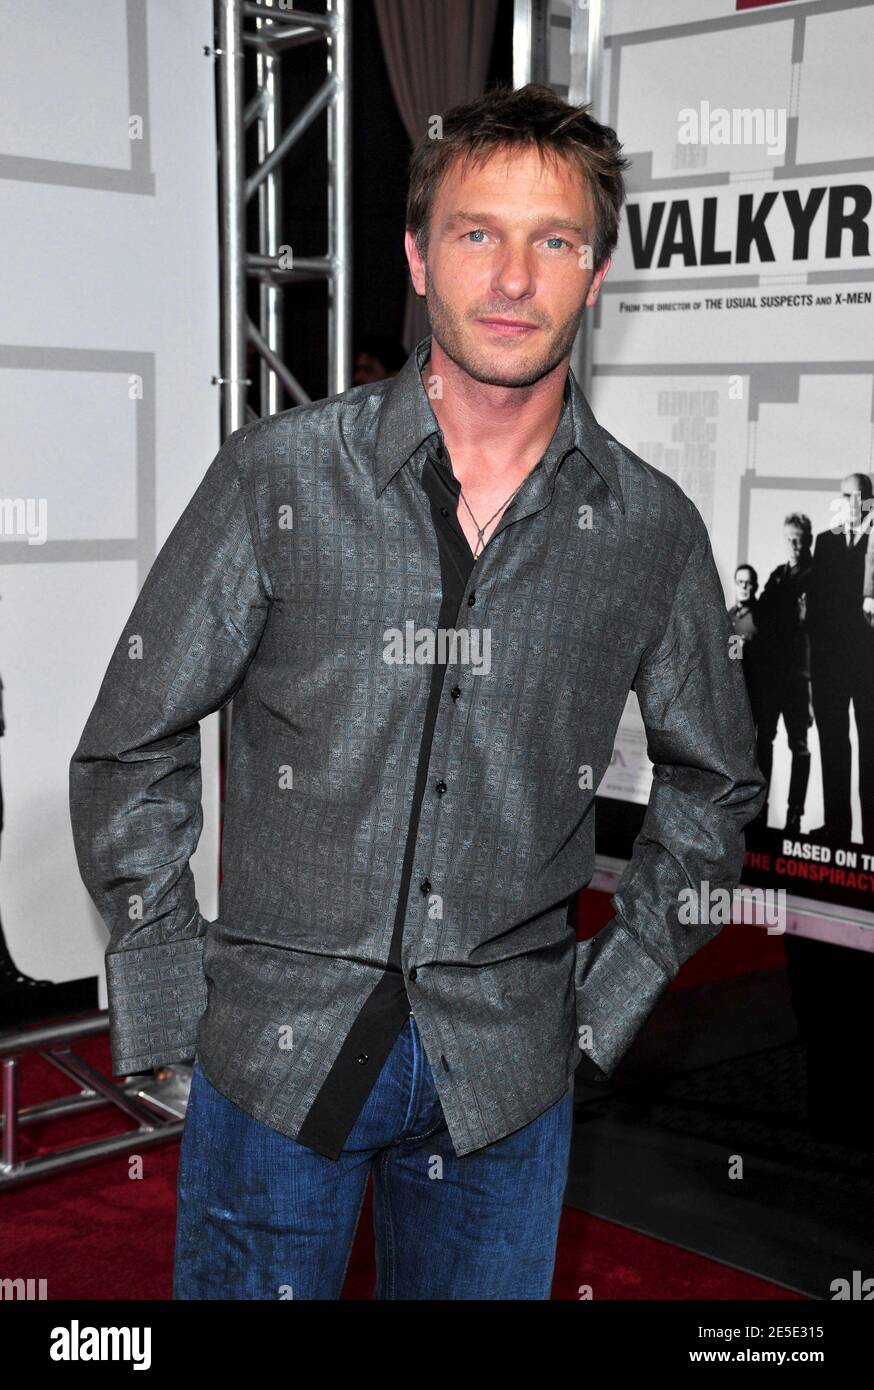 Cast member Thomas Kretschmann arriving for the premiere of 'Valkyrie' at Rose Hall, Time Warner Center in New York City, NY, USA on December 15, 2008. Photo by Gregorio Binuya/ABACAPRESS.COM Stock Photo